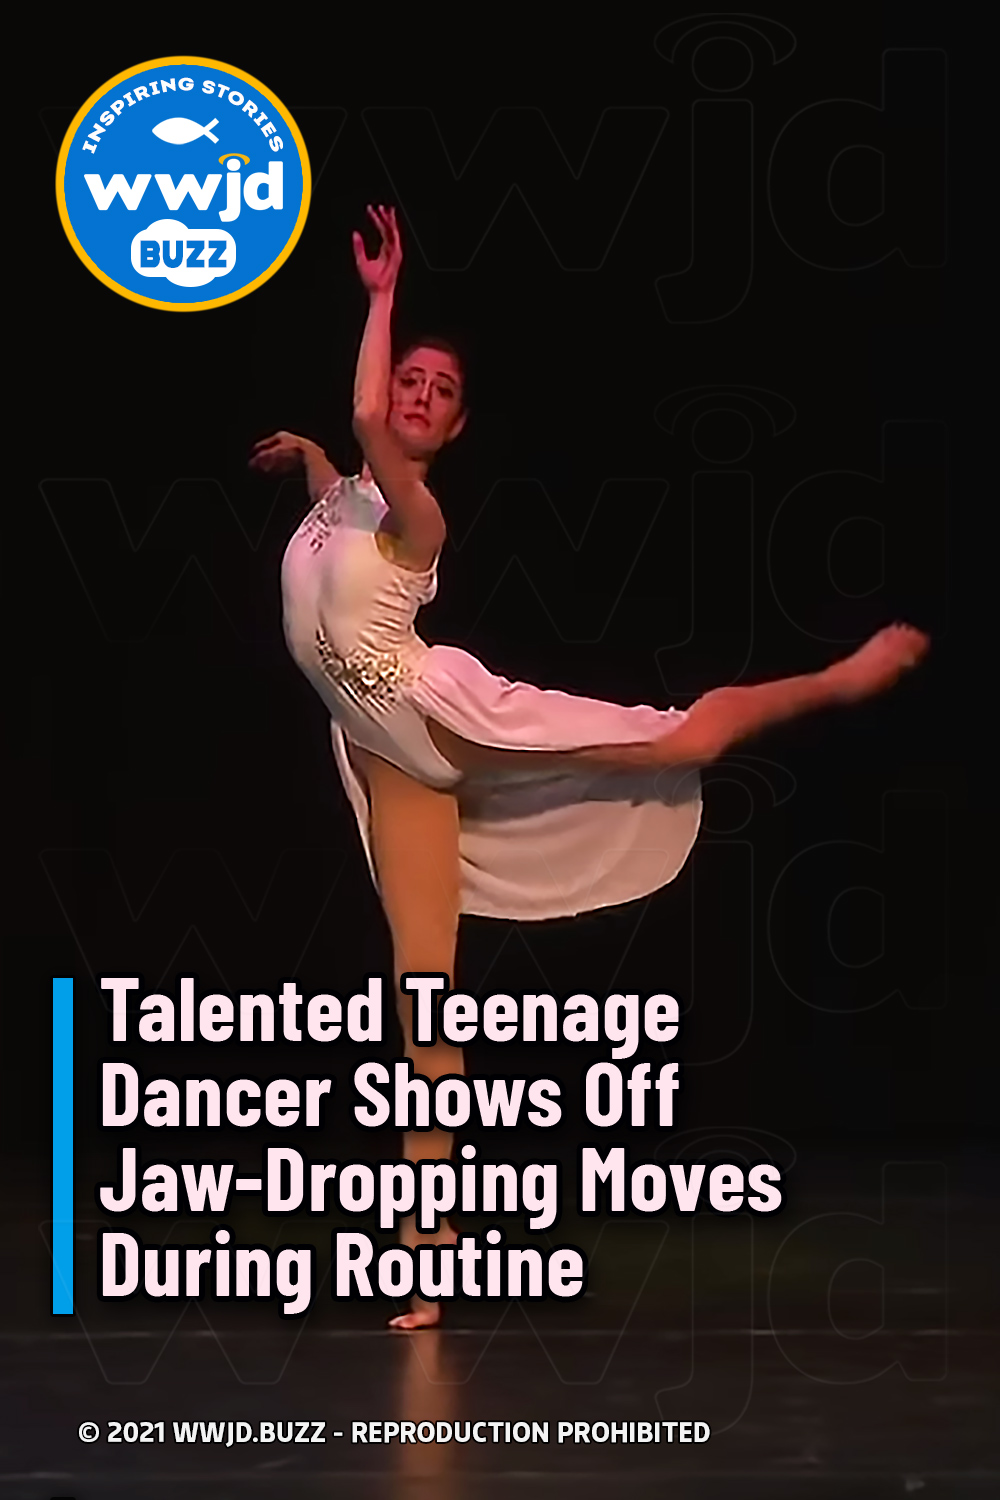 Talented Teenage Dancer Shows Off Jaw-Dropping Moves During Routine